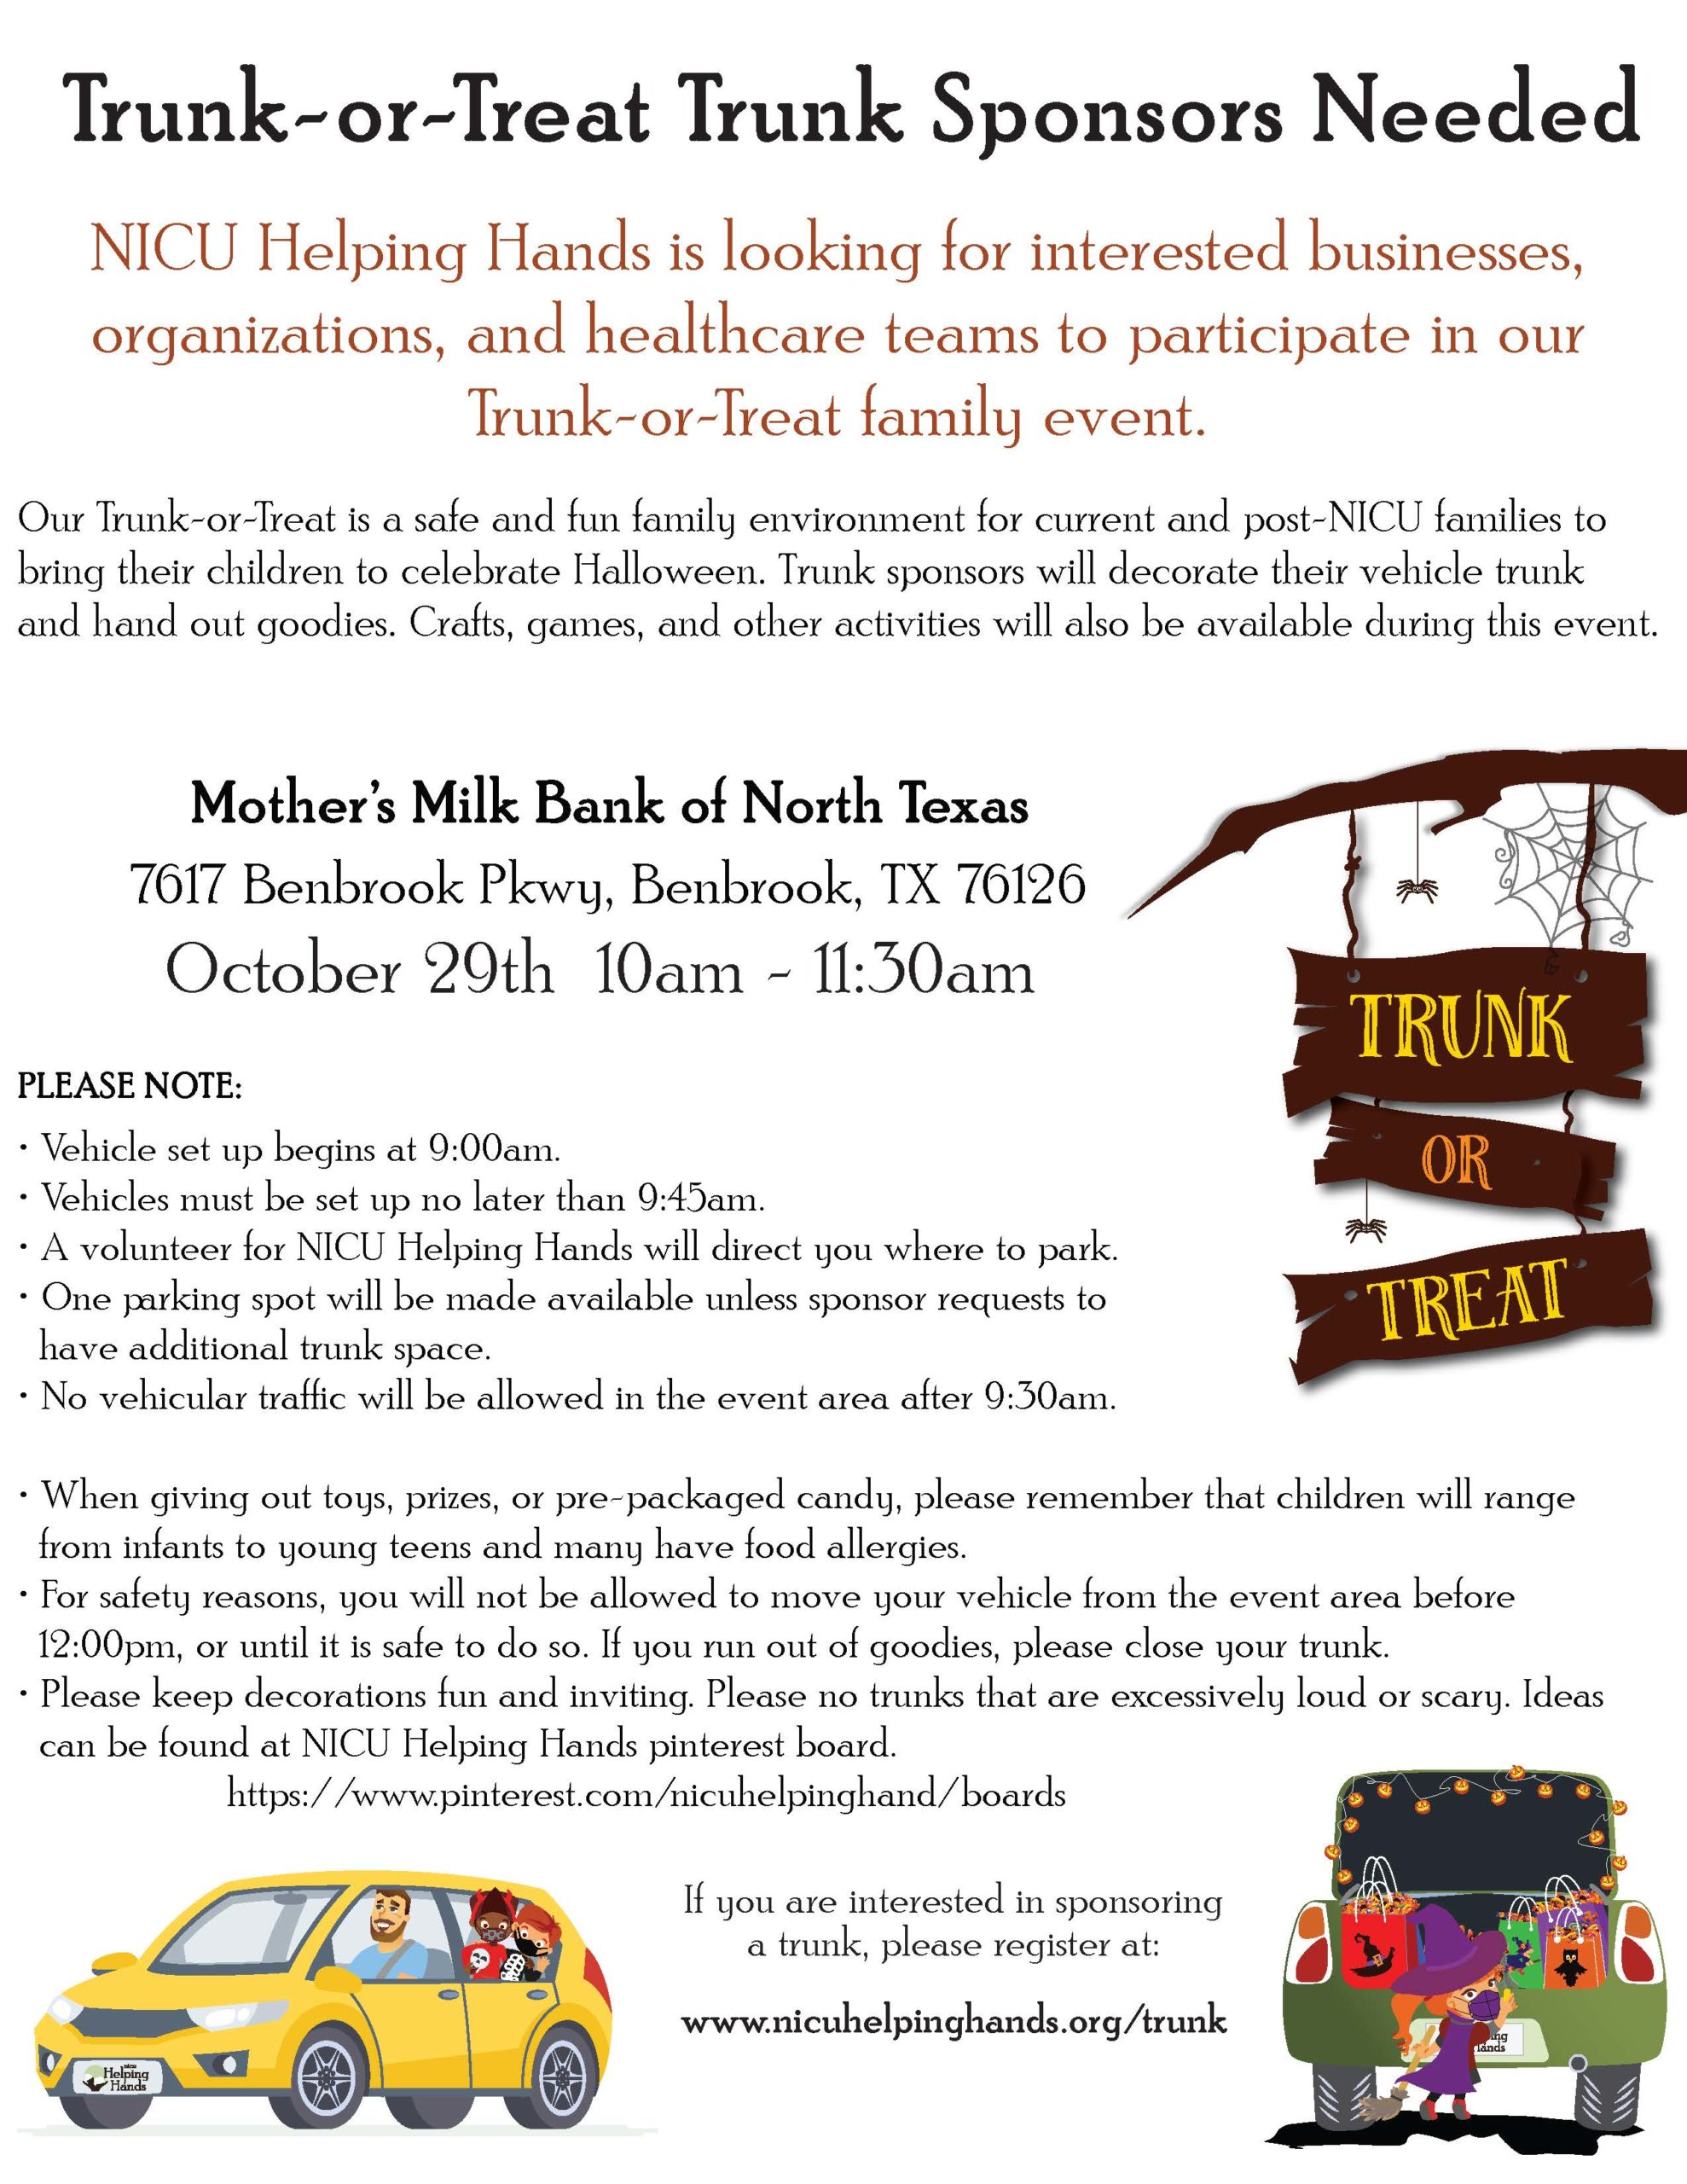 2022 Trunk or Treat Sponsor Request